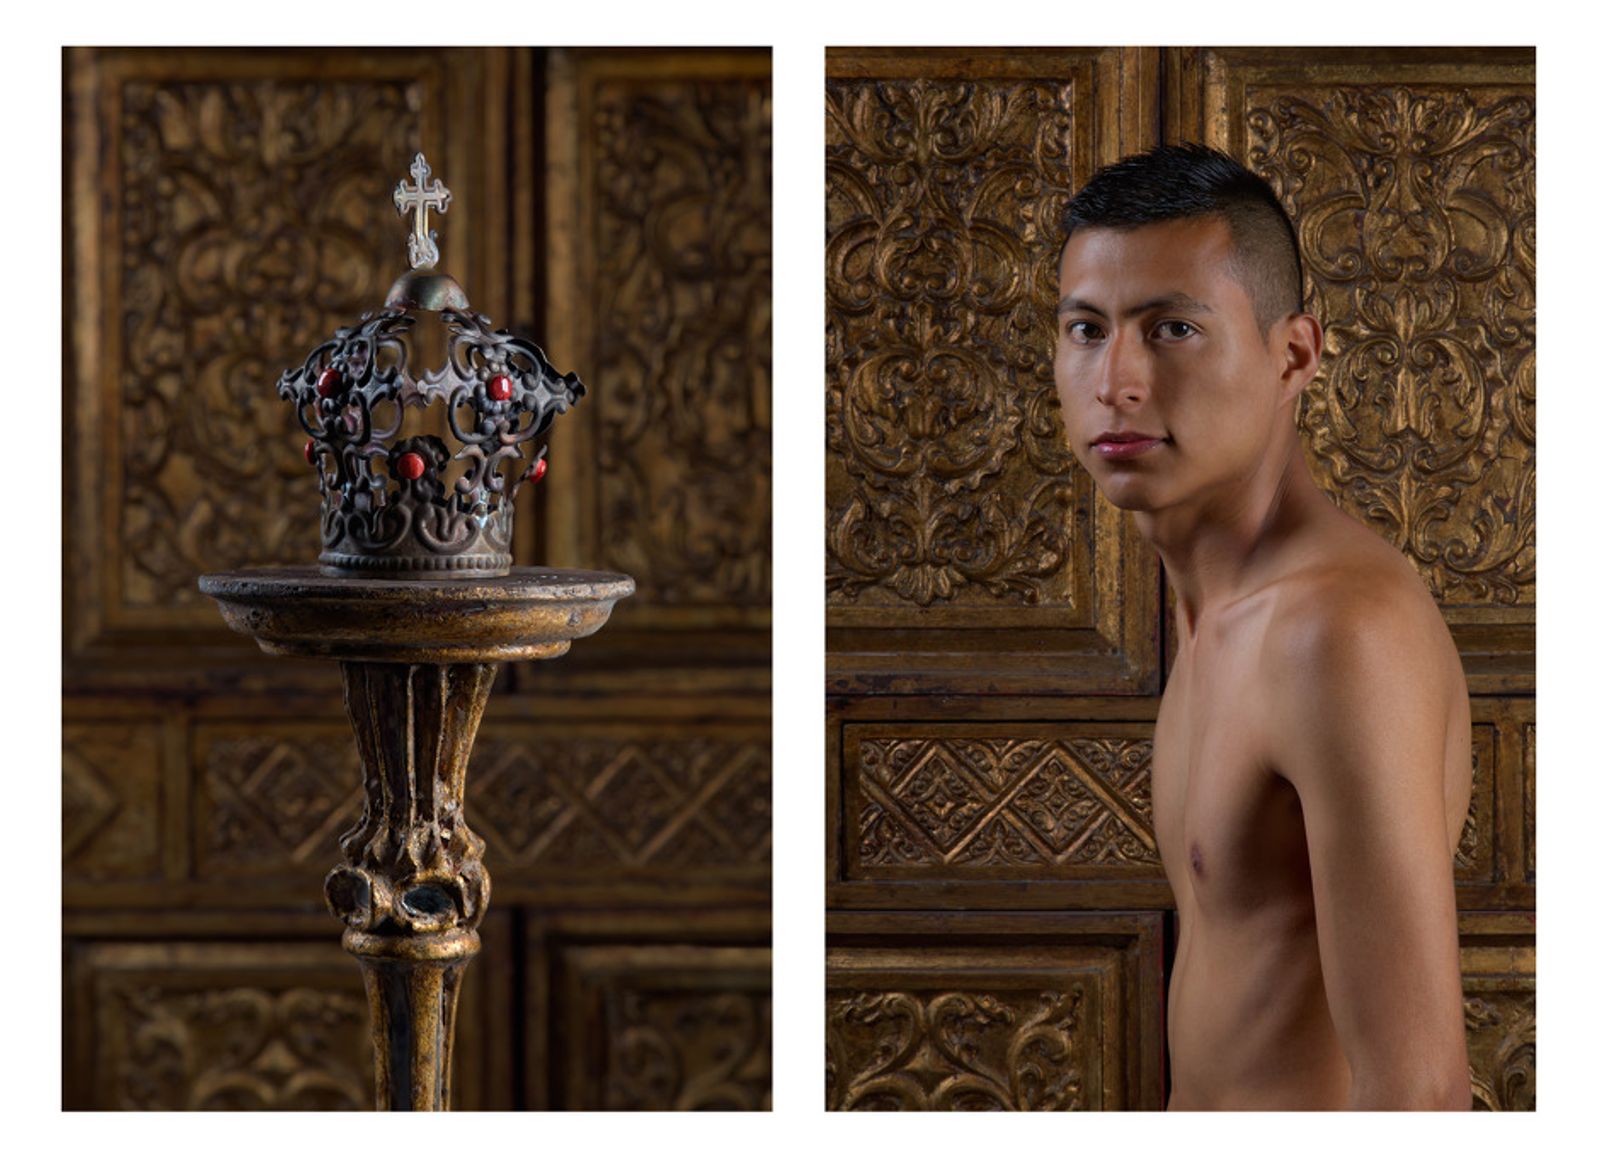 © Juan Jose Barboza-Gubo and Andrew Mroczek - Image from the Los Chicos (Lima, Peru) photography project